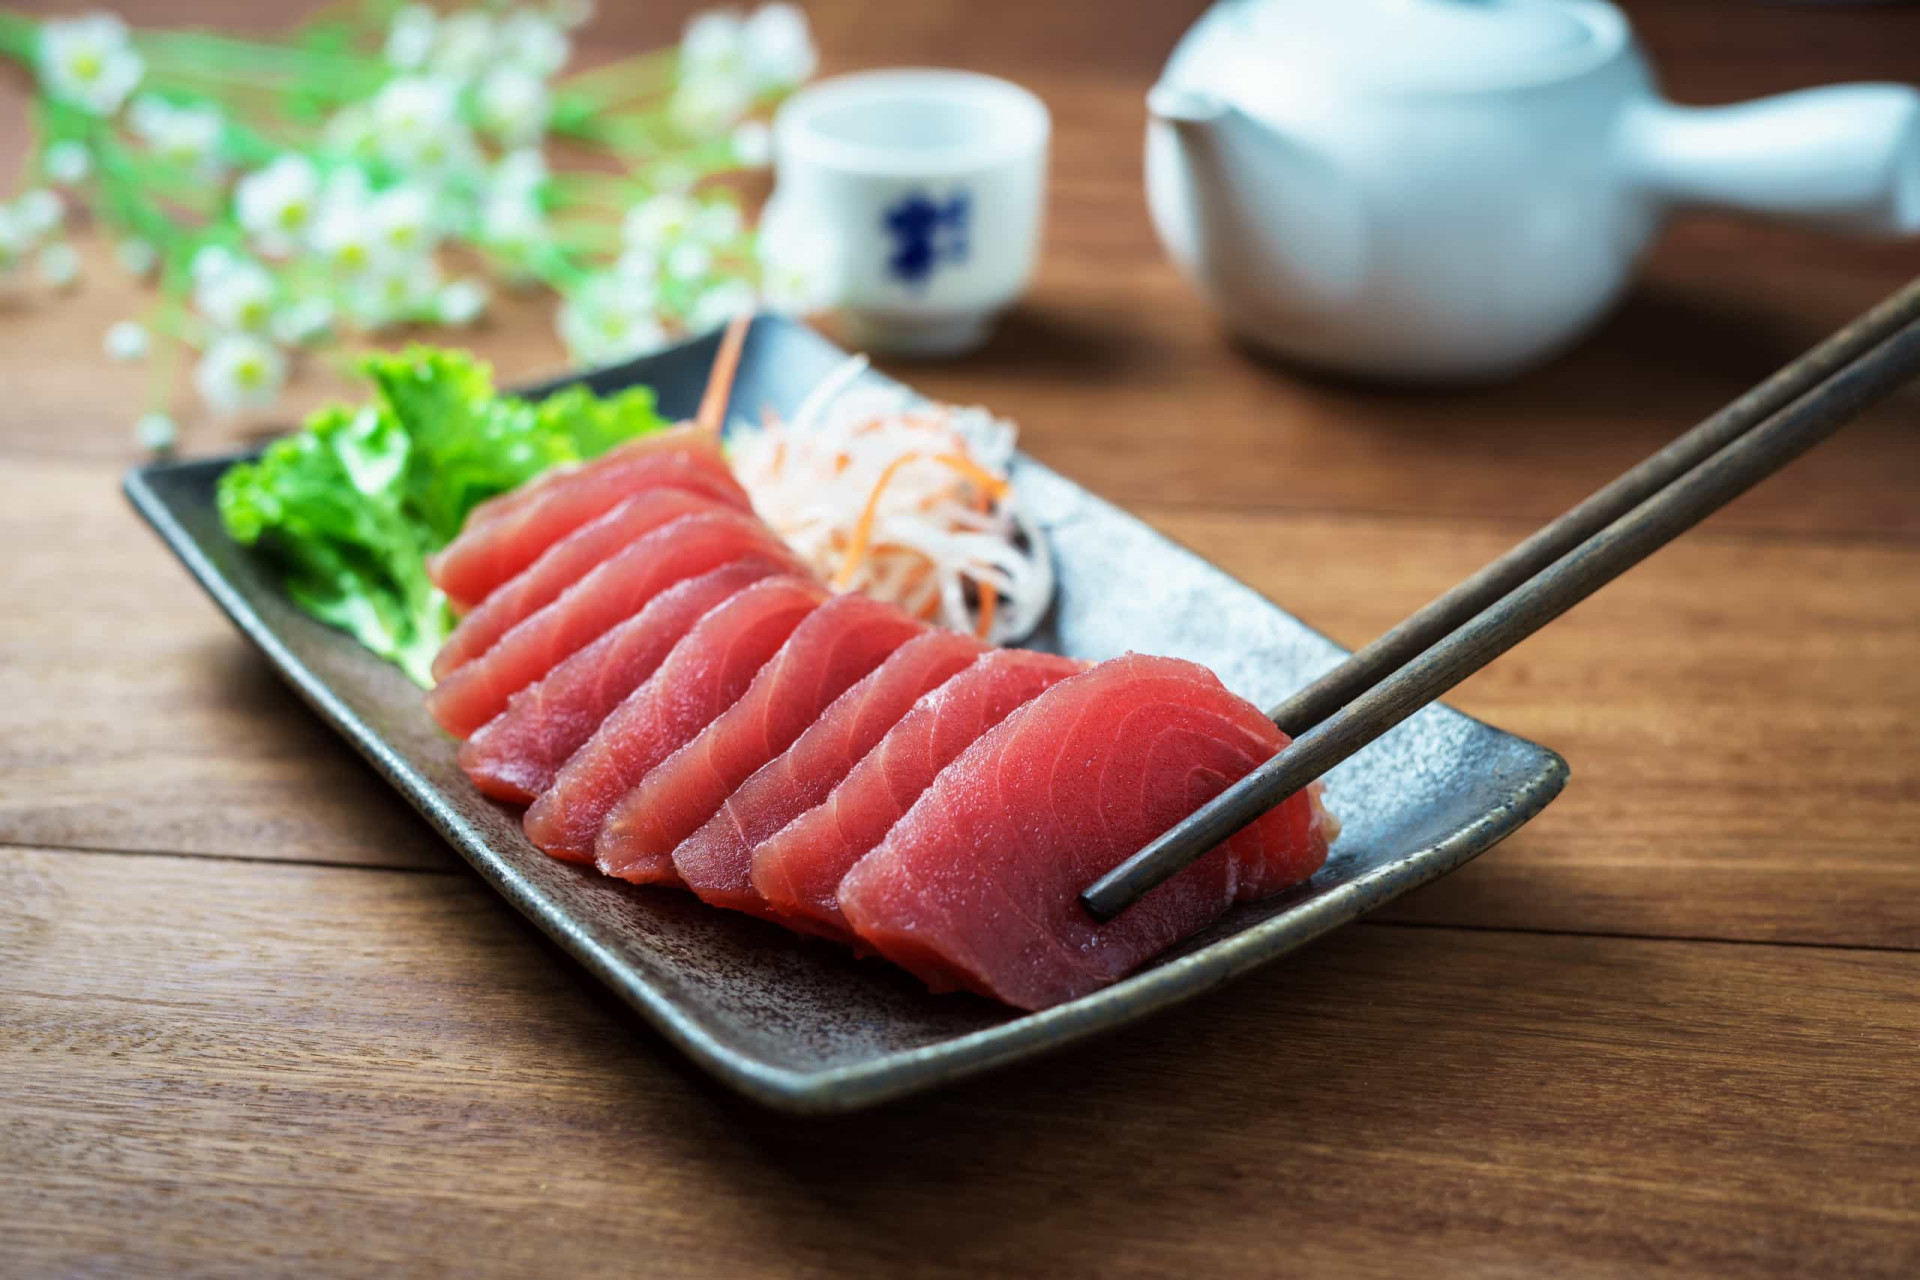 <p>Japan is renowned for being the largest consumer of tuna, particularly the esteemed Atlantic bluefin variety used in gourmet sushi. Additionally, Japan it is also the leading nation in tuna farming research</p><p>You may also like:<a href="https://www.starsinsider.com/n/482389?utm_source=msn.com&utm_medium=display&utm_campaign=referral_description&utm_content=578219en-en"> The best pet for you based on your zodiac sign</a></p>